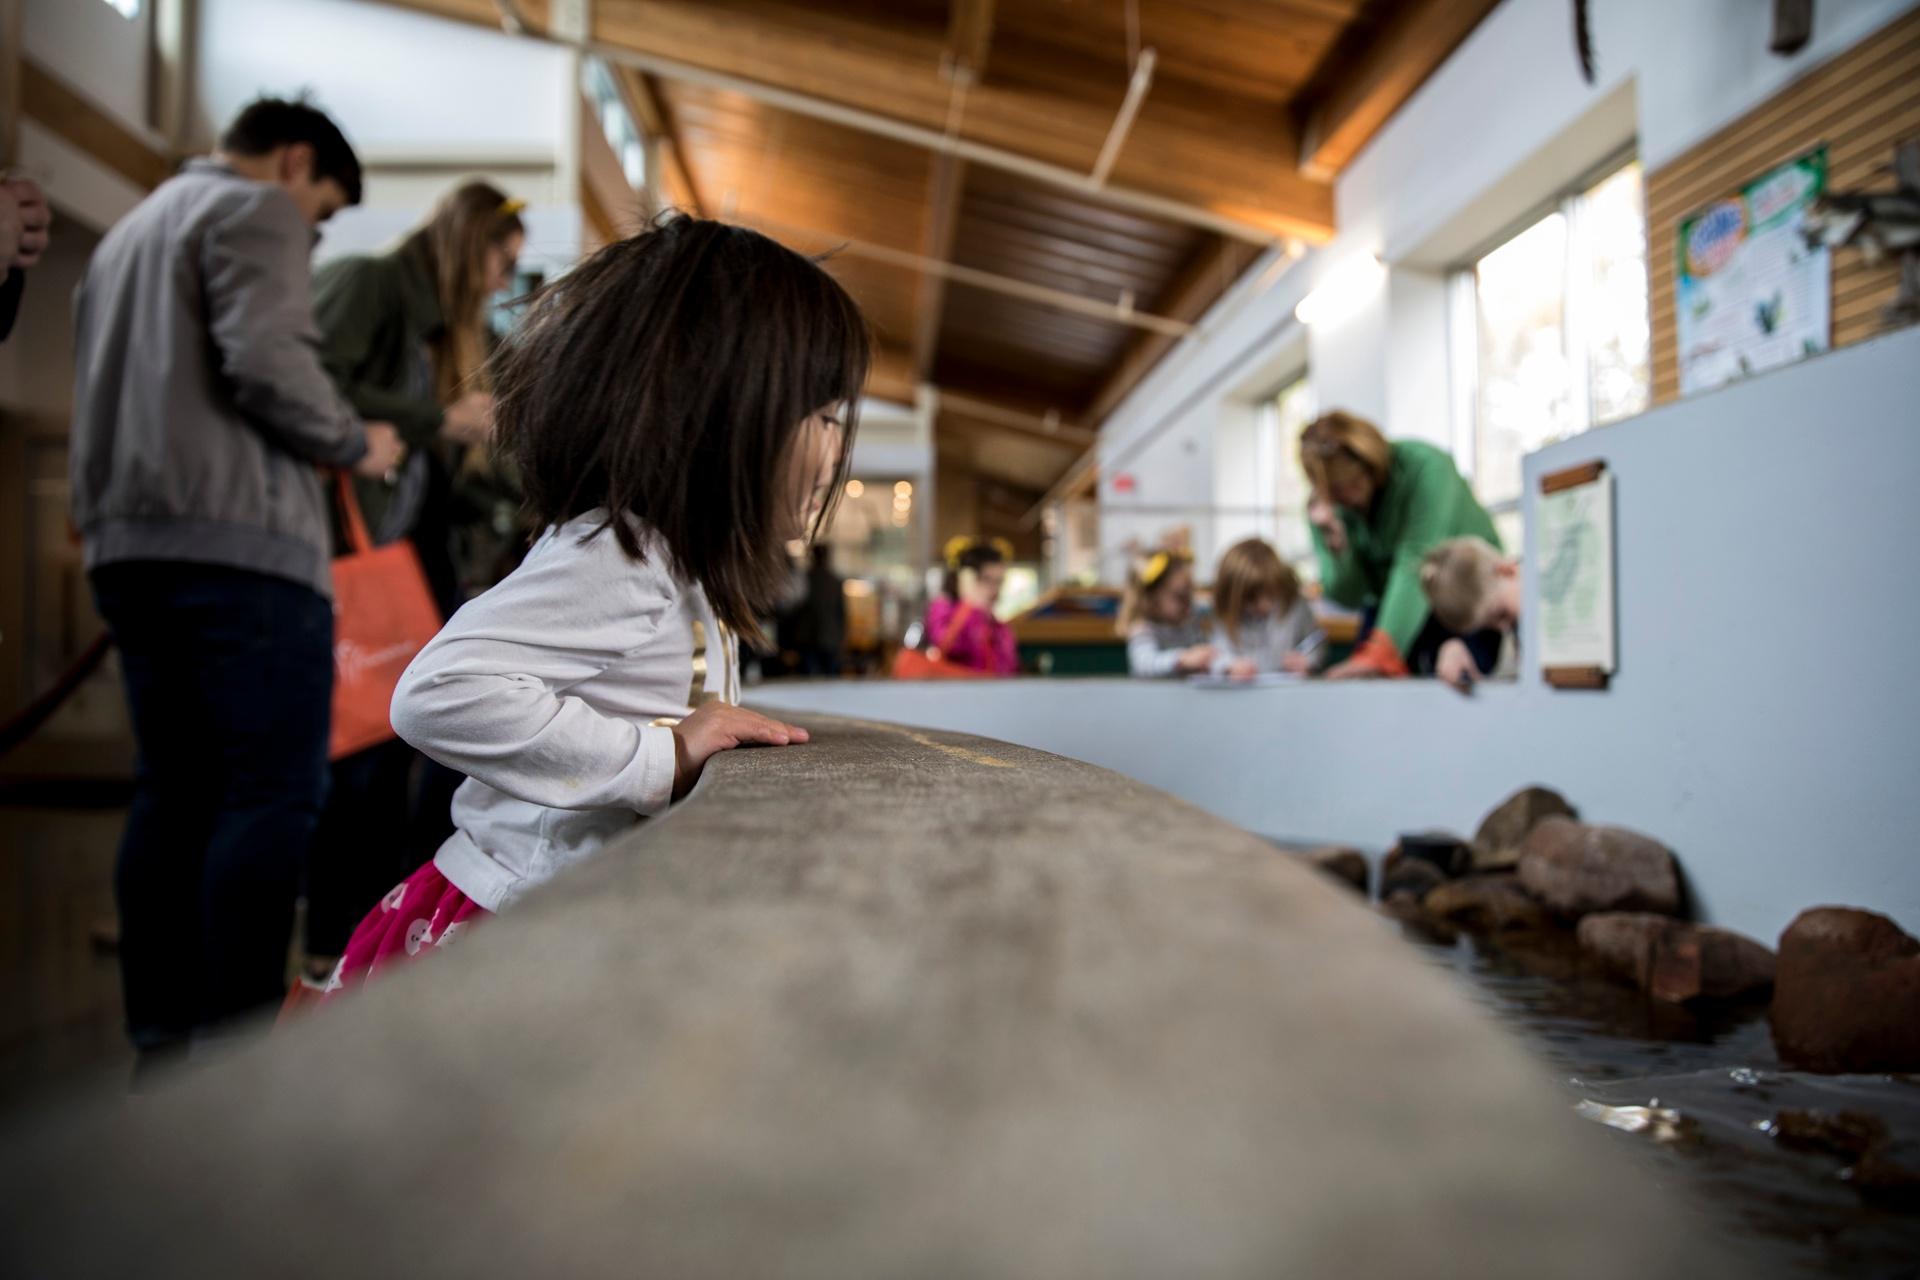 Girl at Discovery Center looking at stream indoors